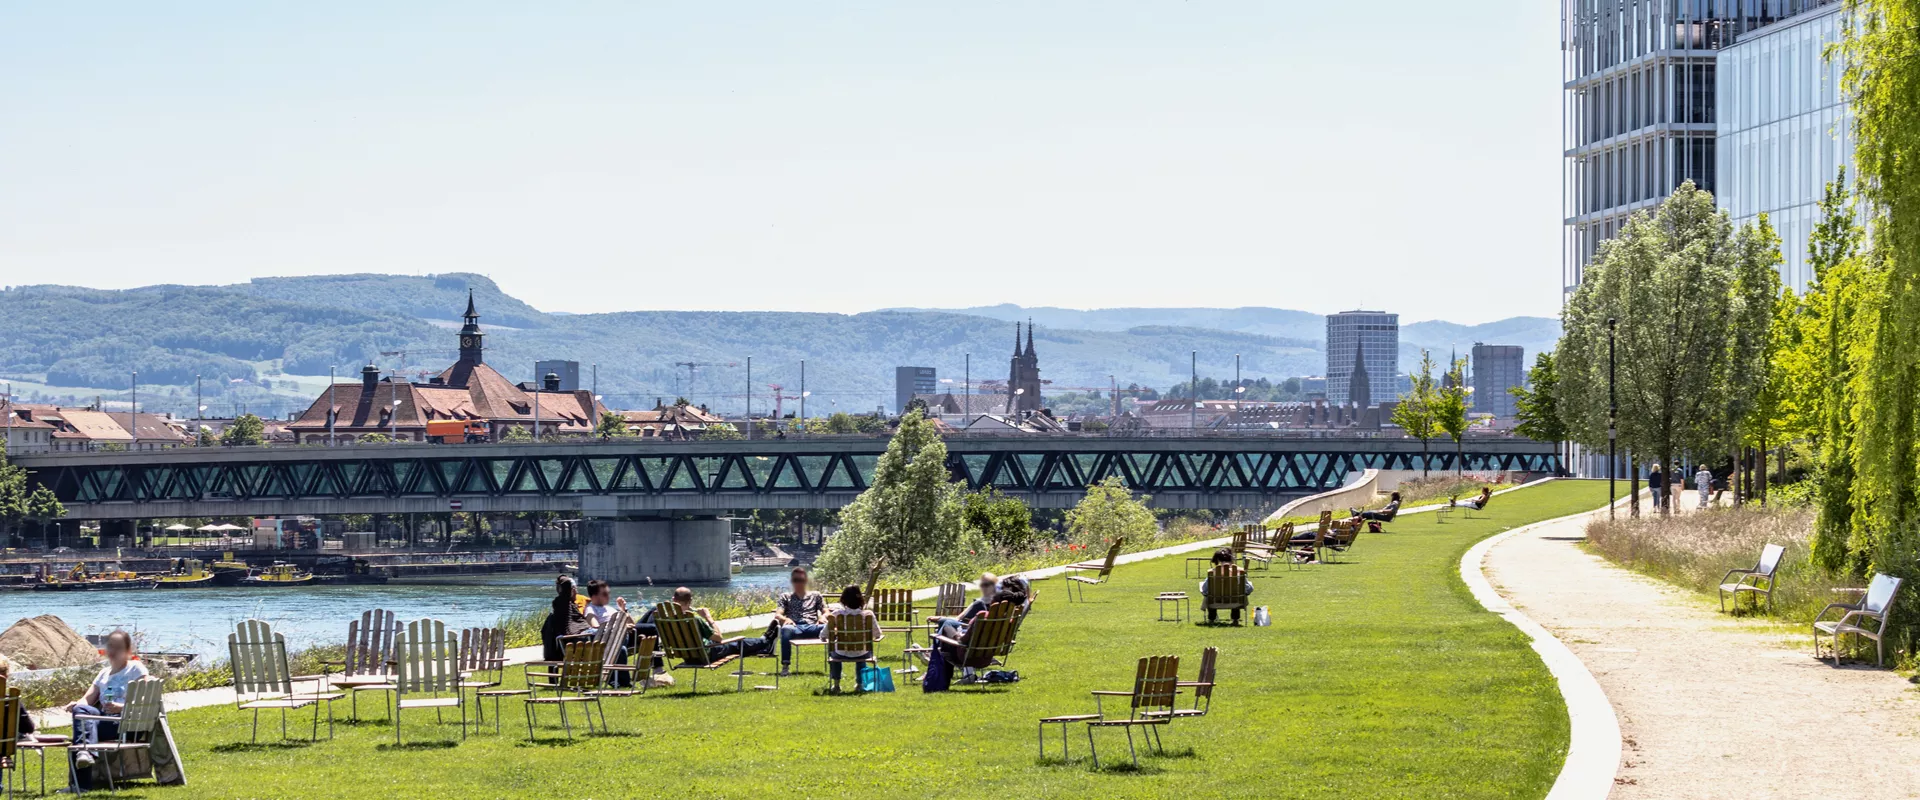 A panoramic view of Basel，from the Novartis Campus with people lounging in the foreground and the black forest in the background